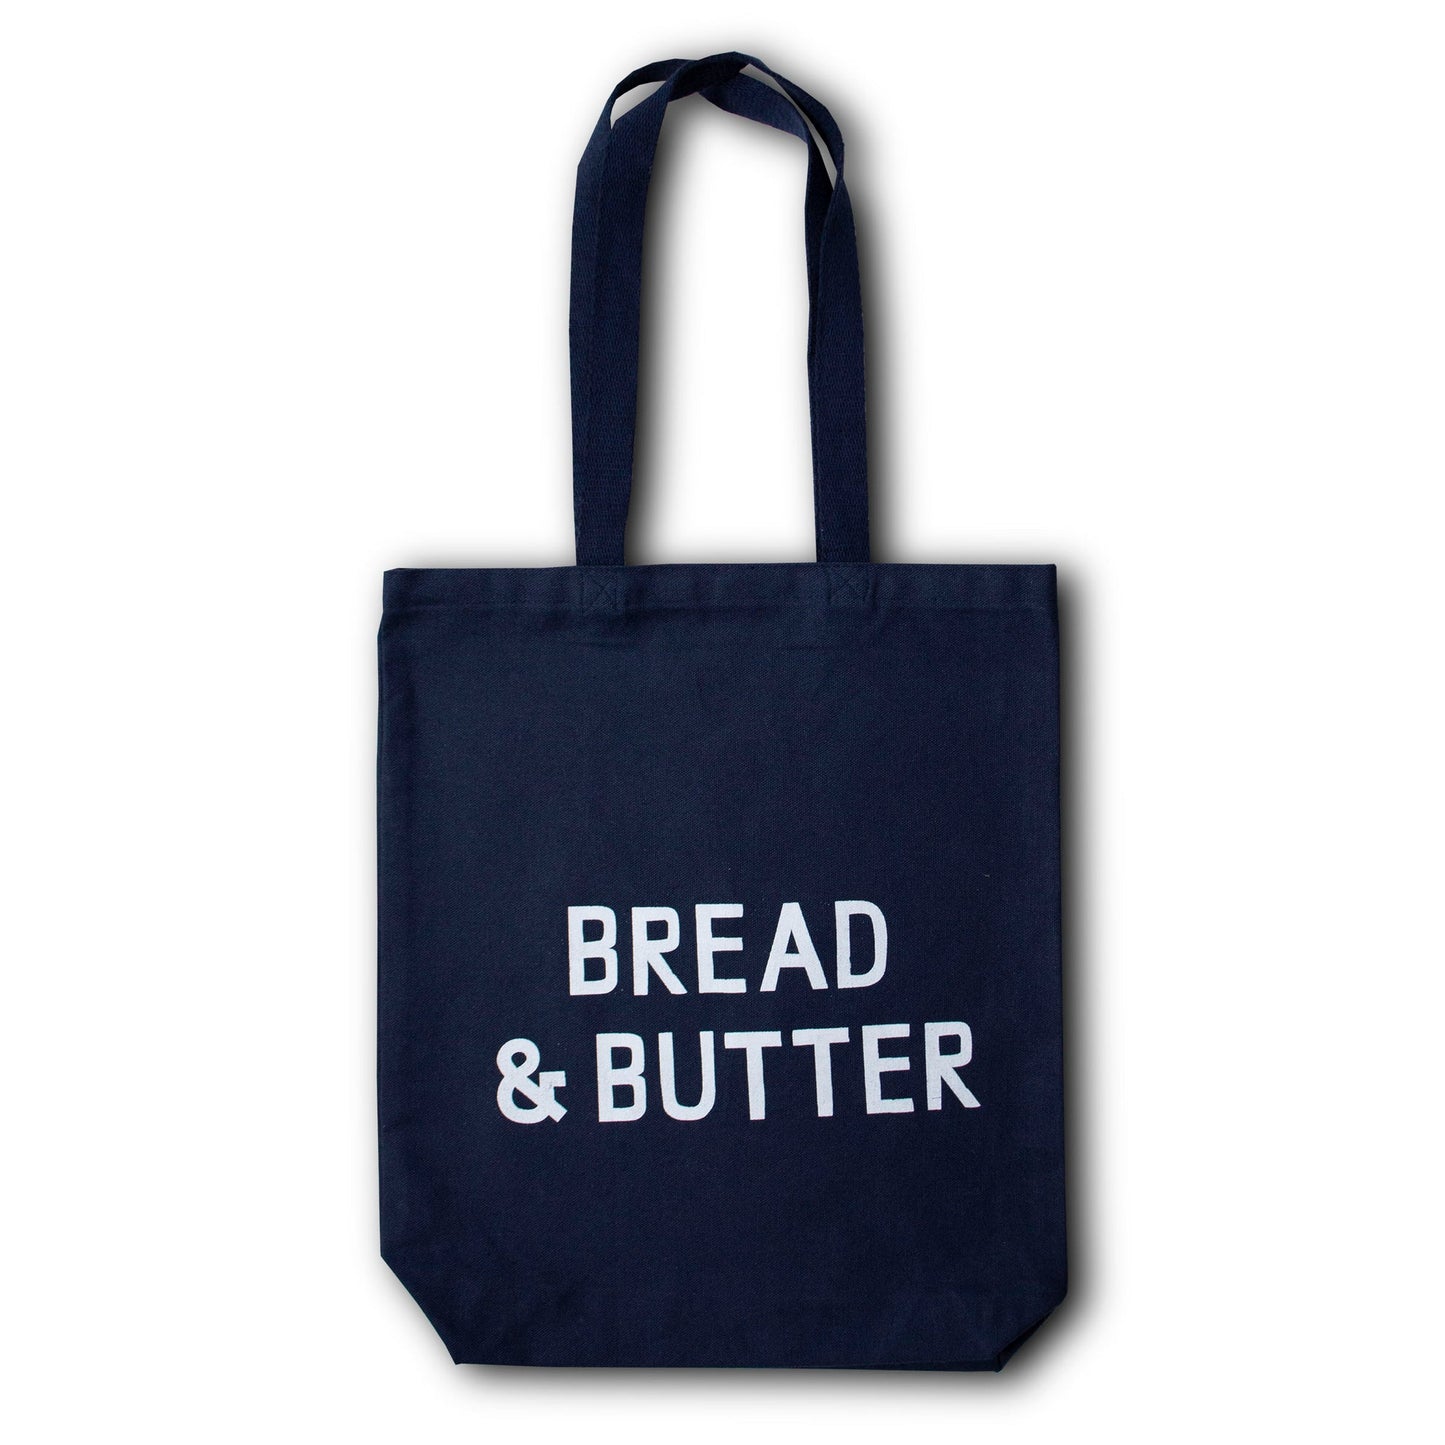 Bread & Butter Navy and White Tote Bag